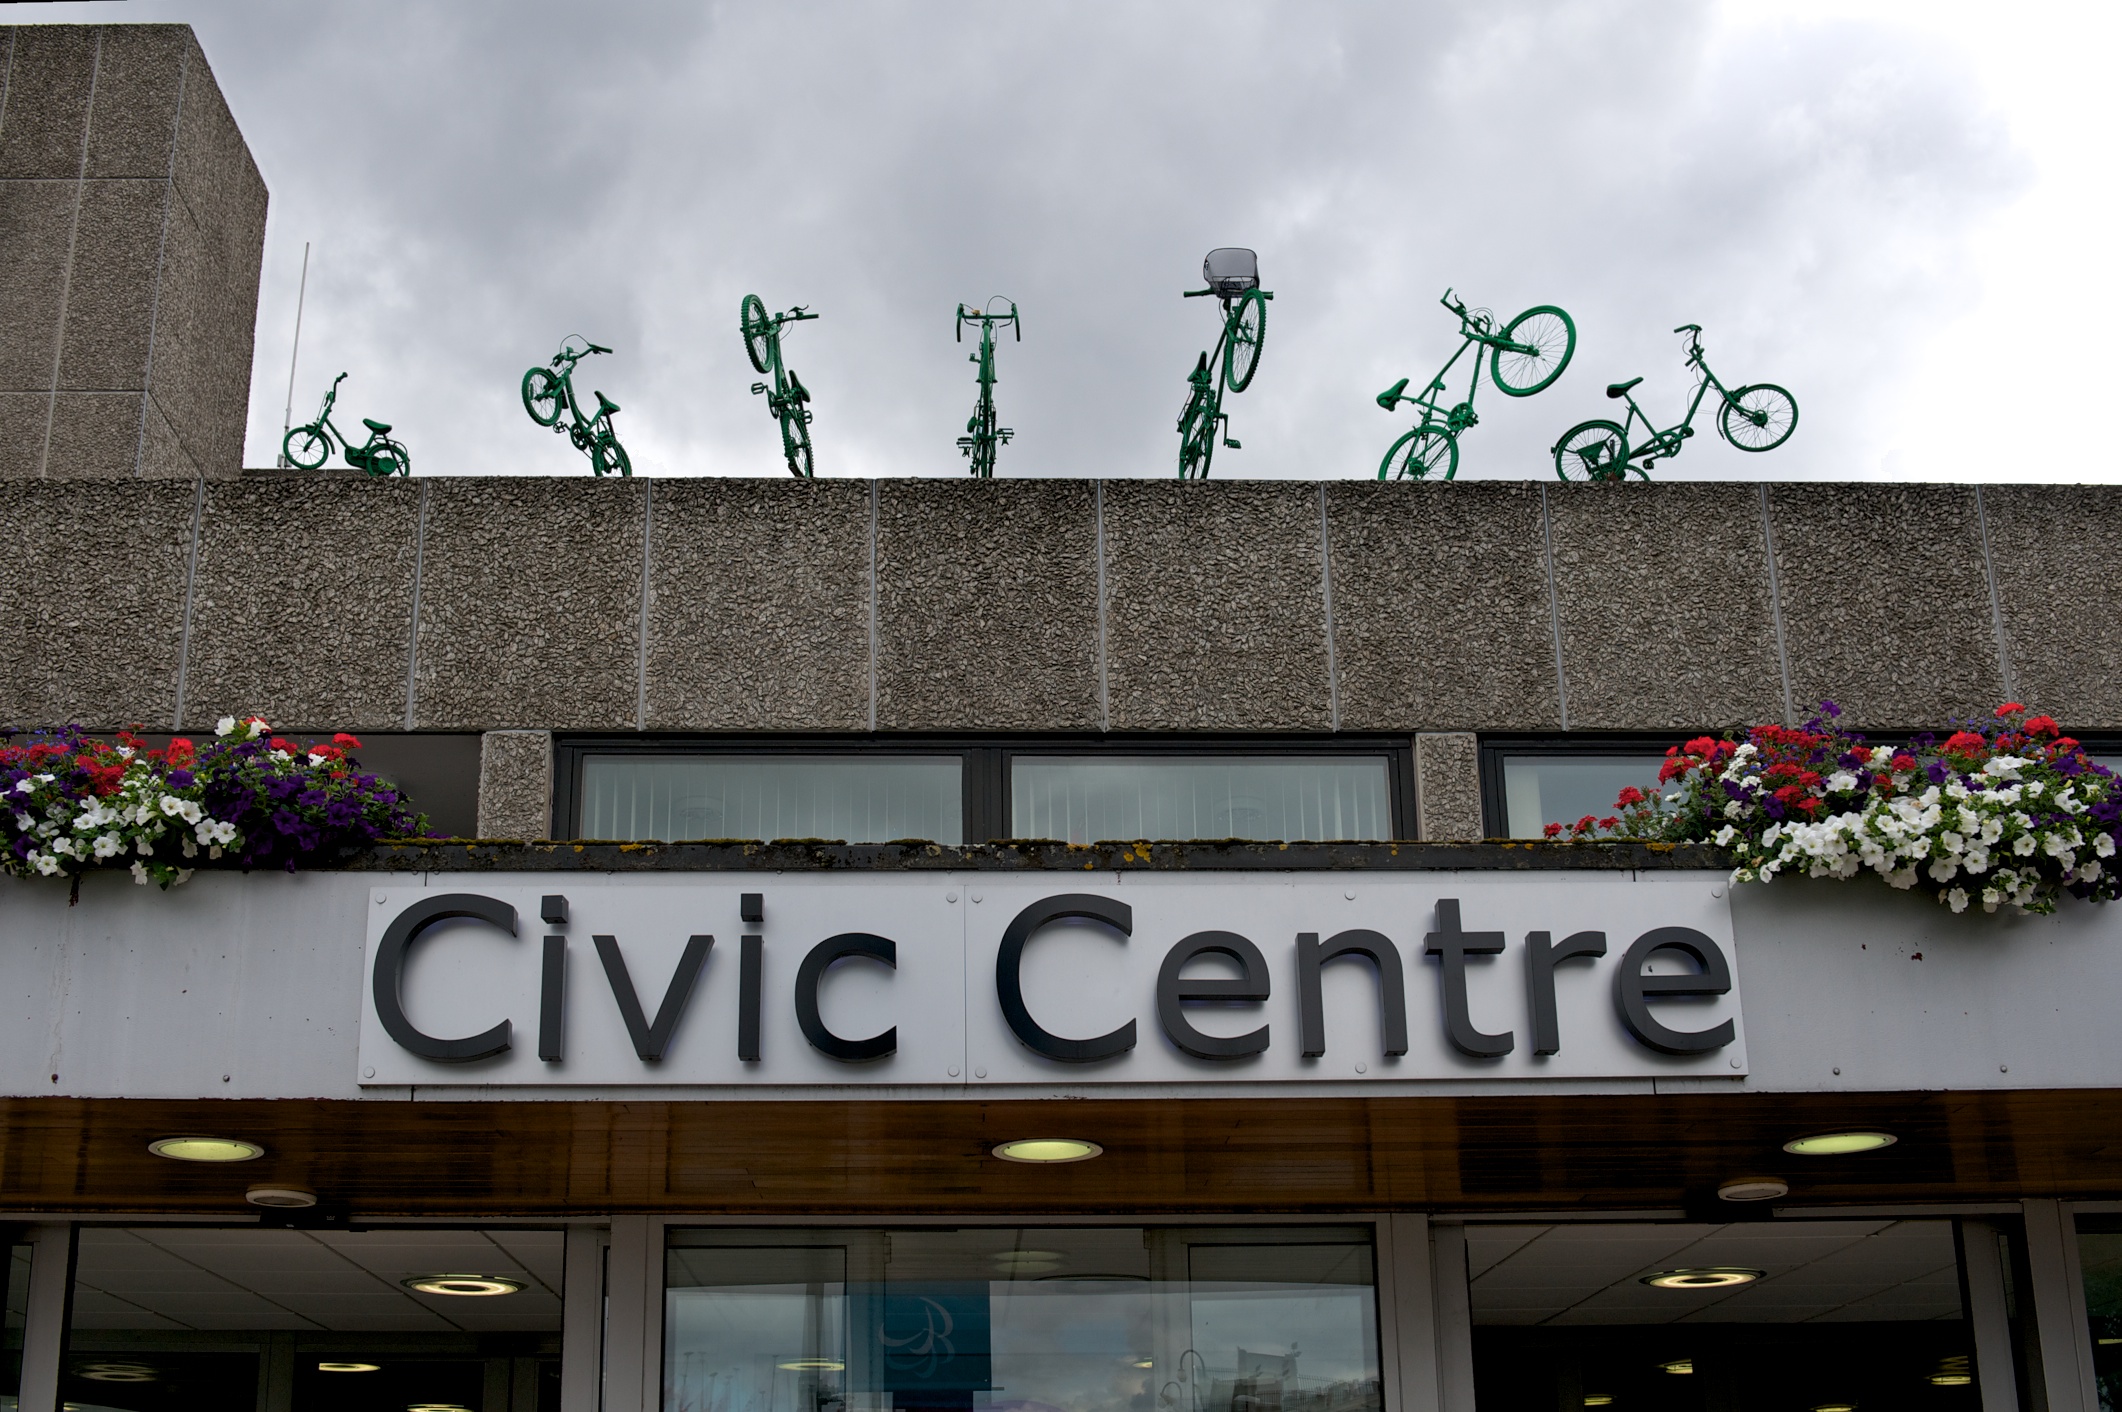 Seven green painted bikes fan out on the Civic Centre rooftop.  At one end a child's bike with stabilisers and at the other, an adult trike